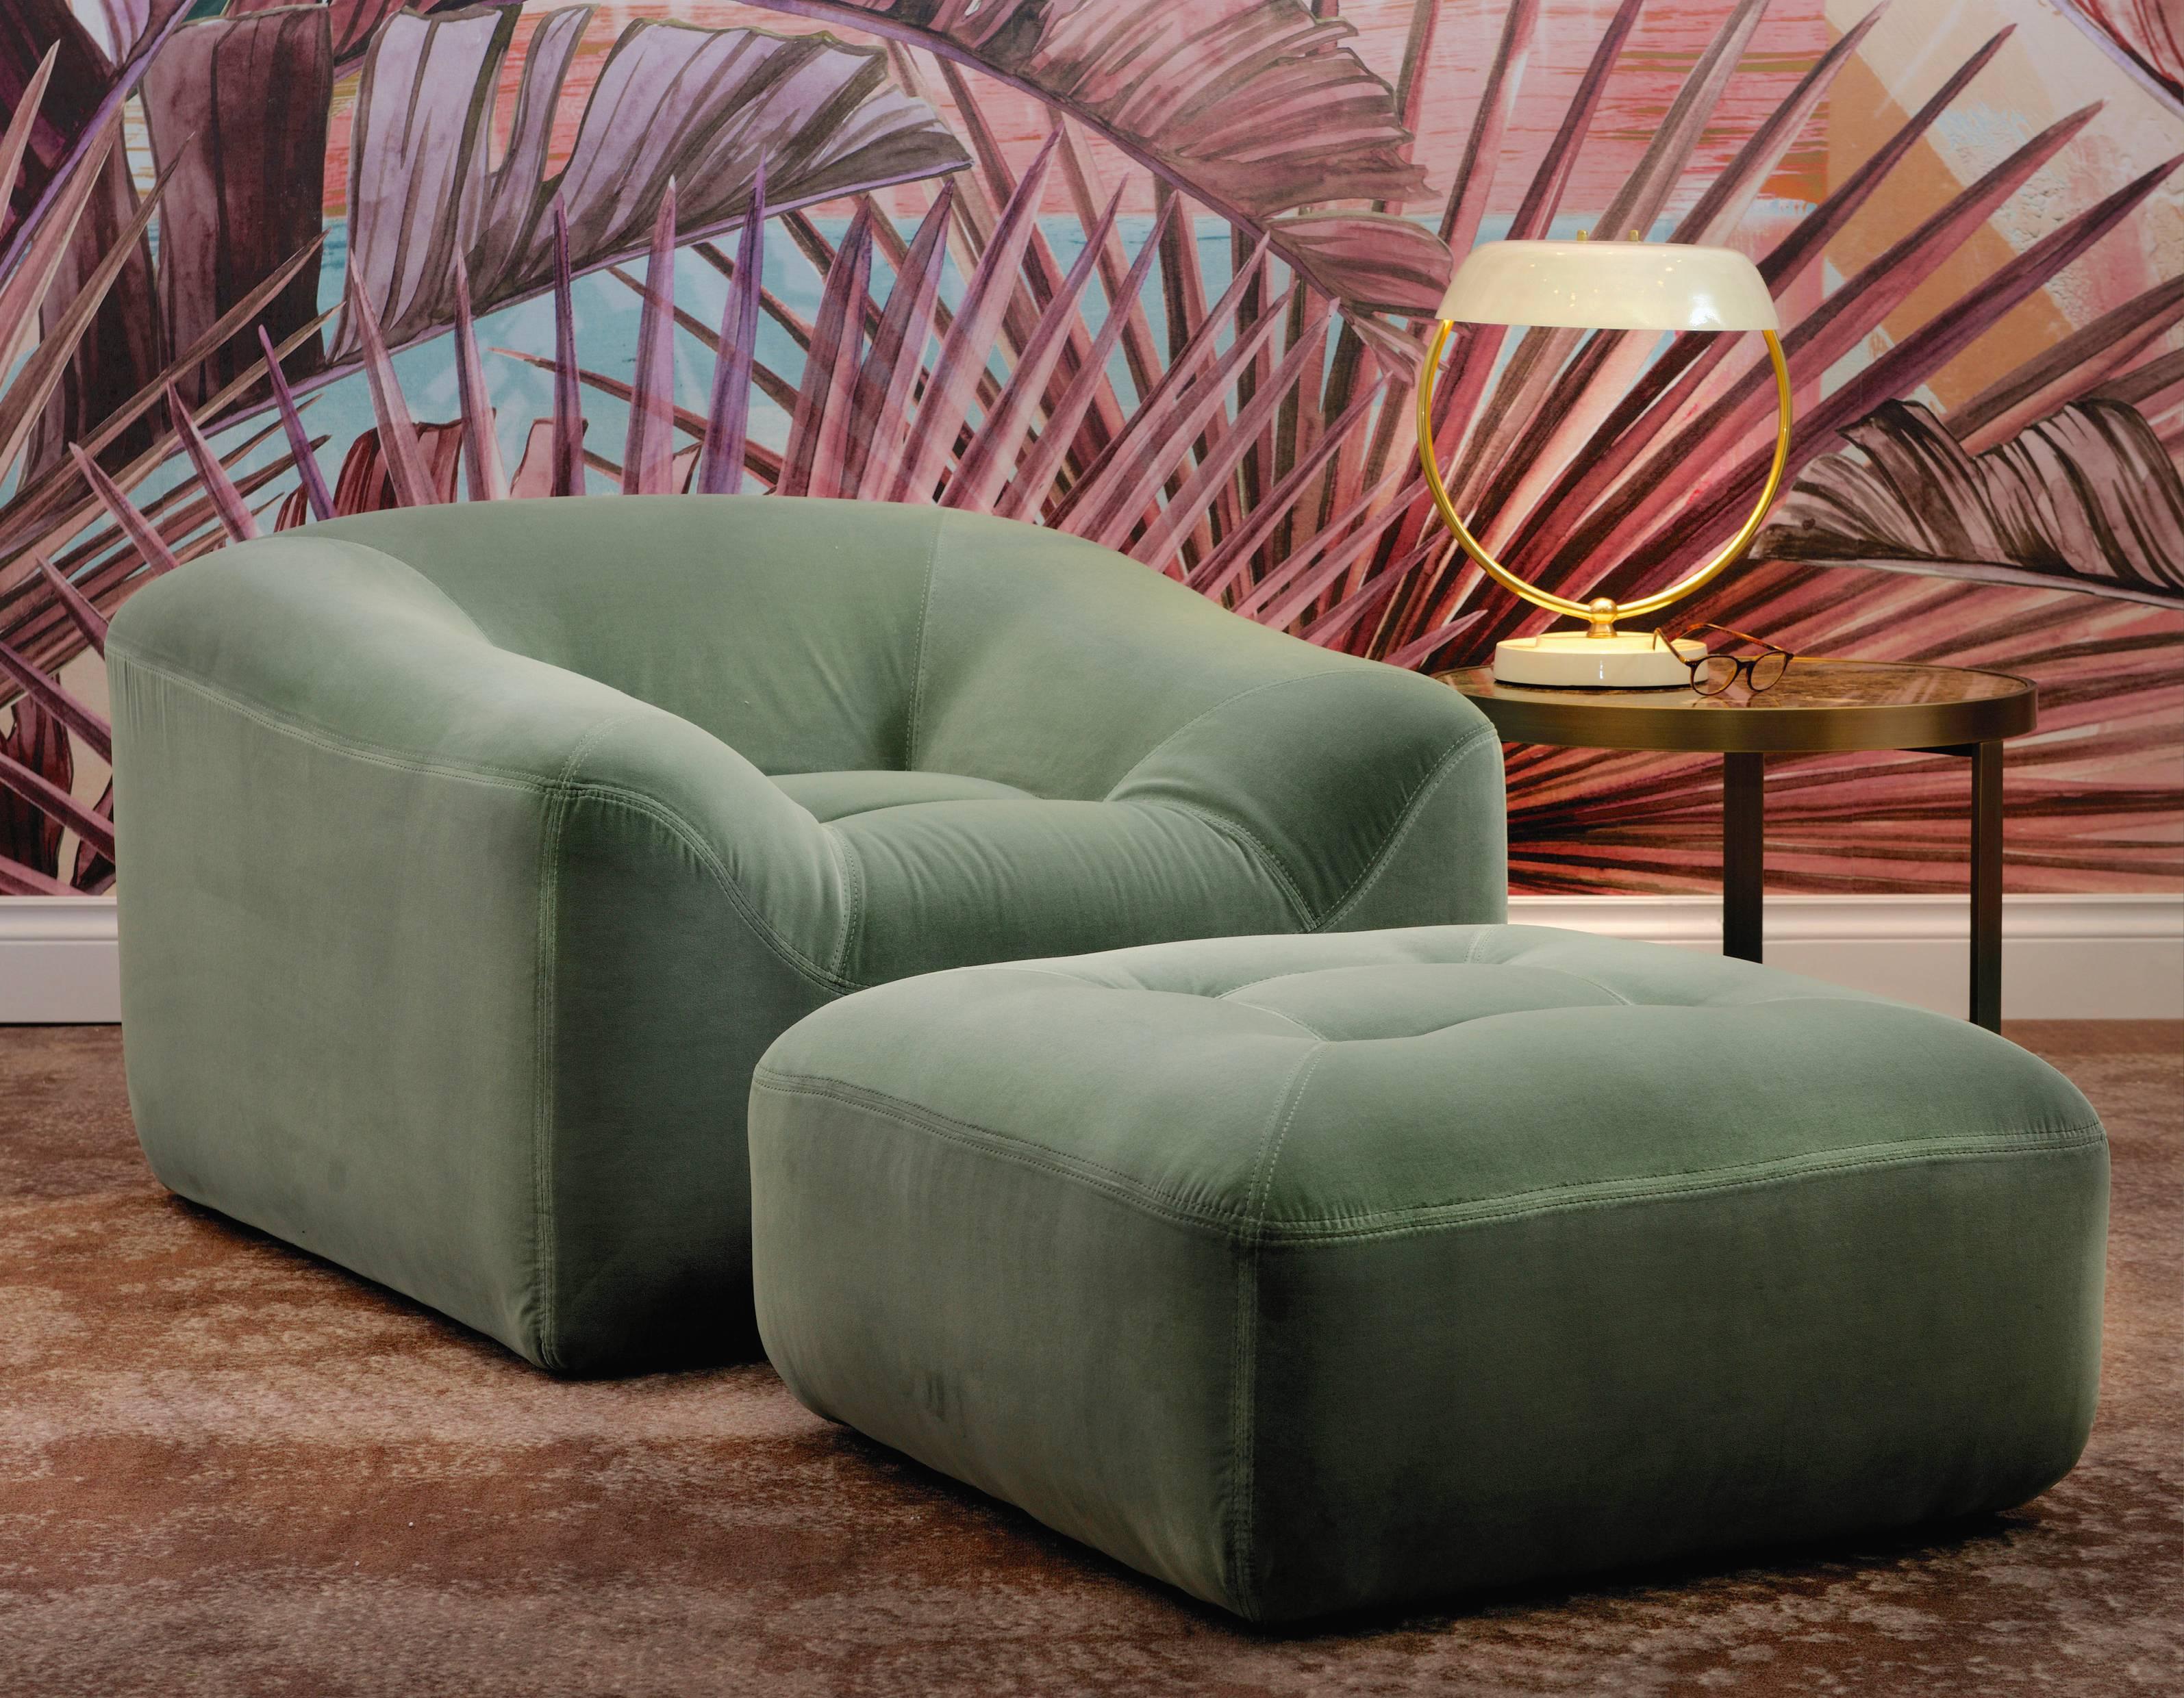 Maxence, a real contemporary proposal. This new model (we propose the Maxence small armchair, the sofa and the pouf) is designed in order to be created without any wooden structure inside, it is made only in foam. This made it very light,